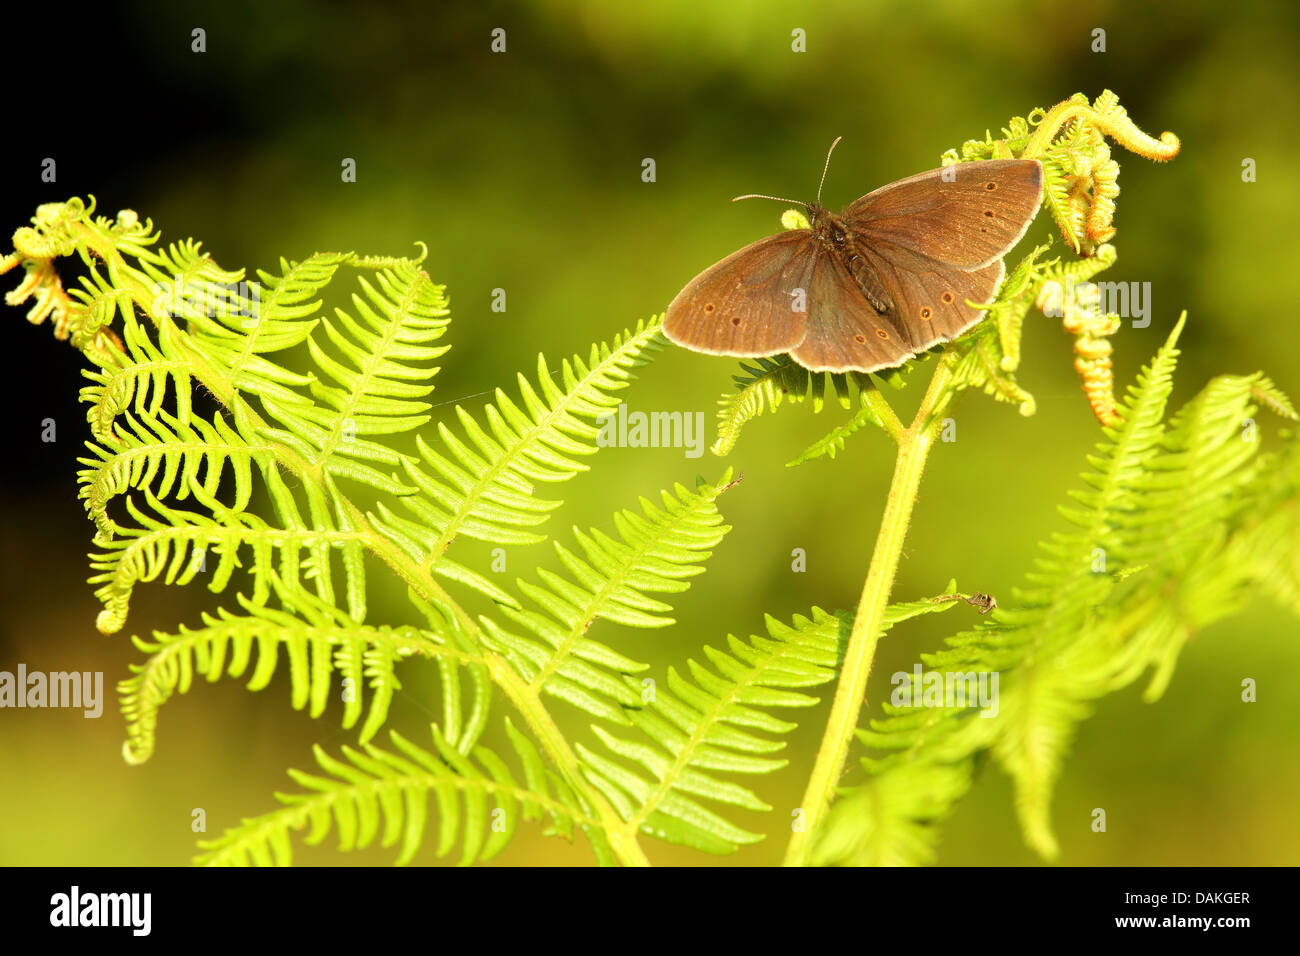 Ringlet Butterfly Banque D'Images